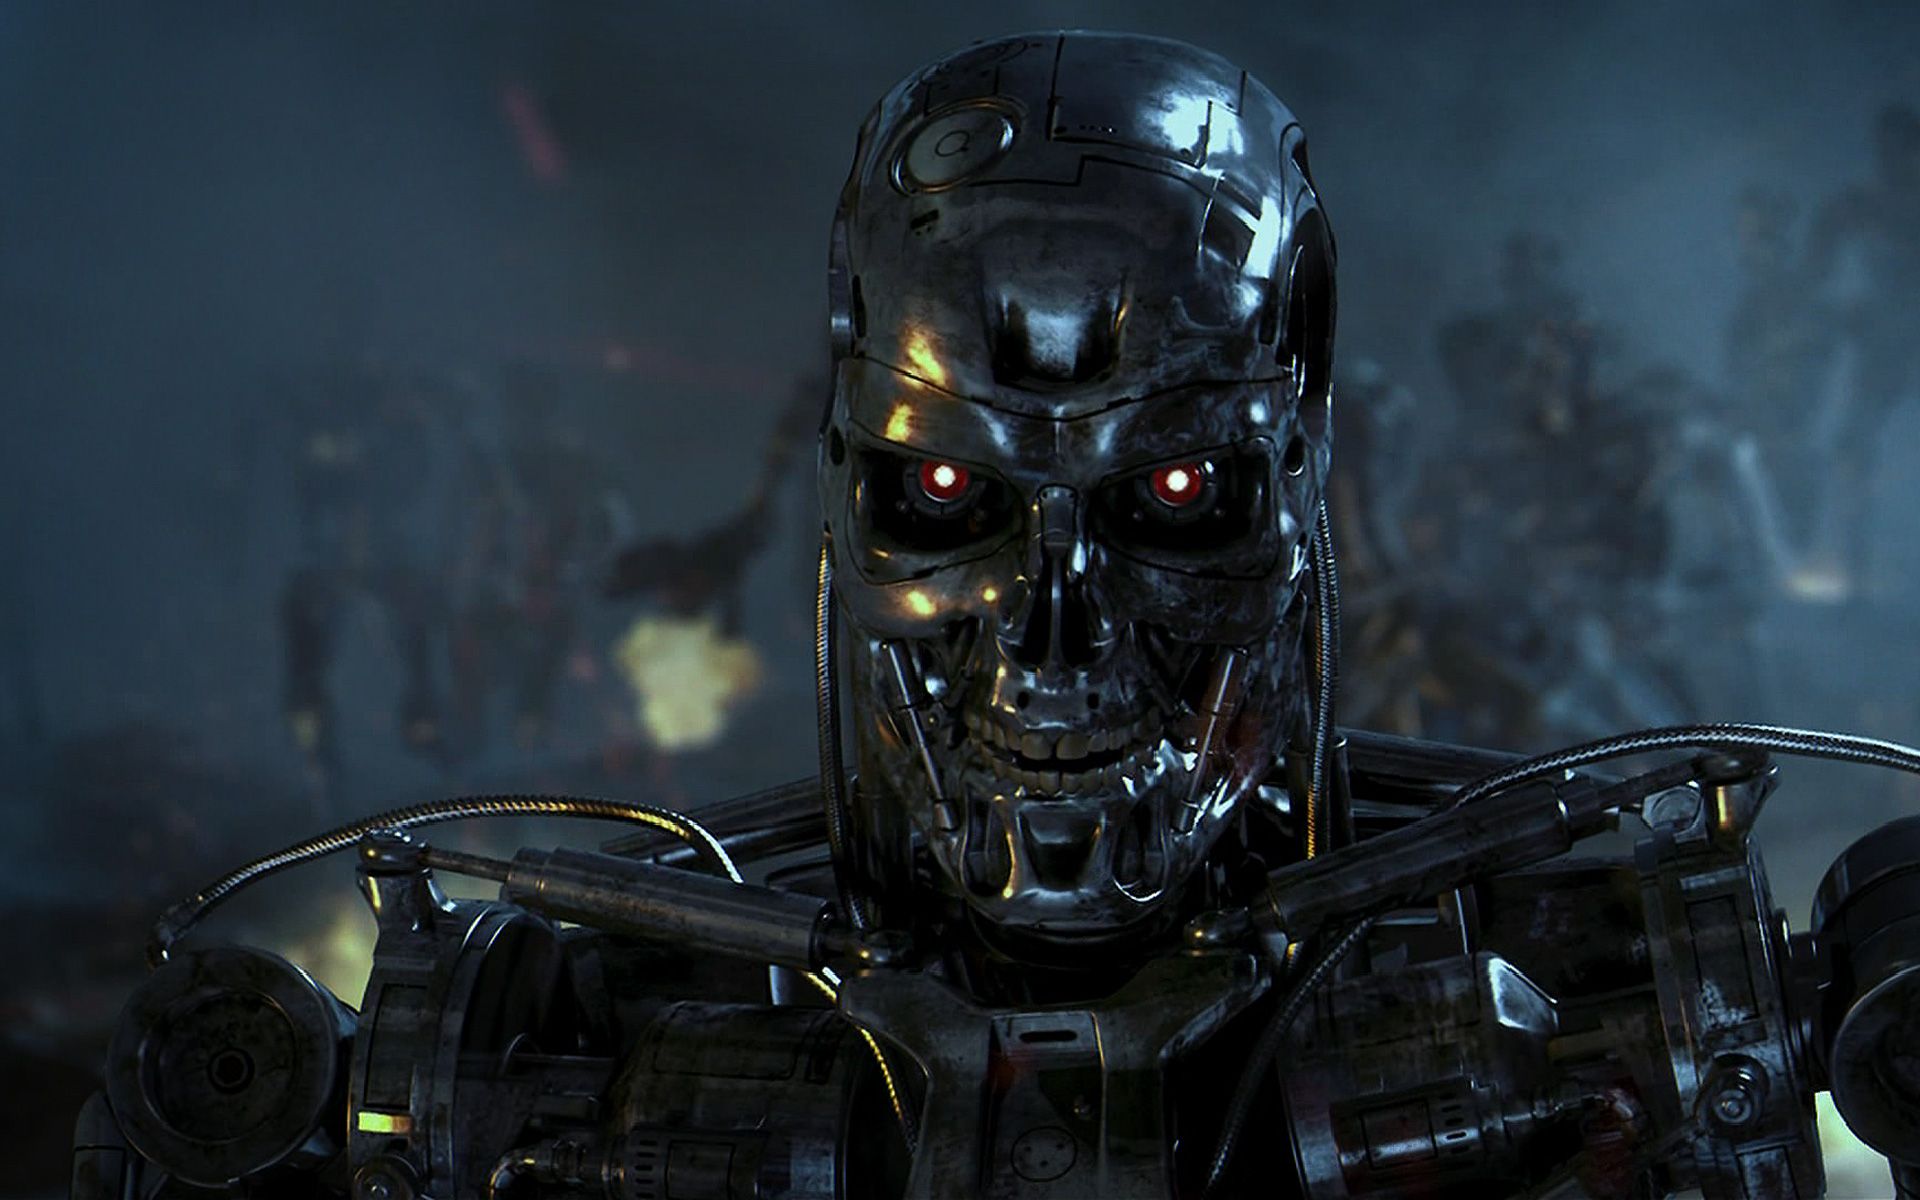 A Look Back: 'Terminator 3: Rise of the Machines' and 'Terminator